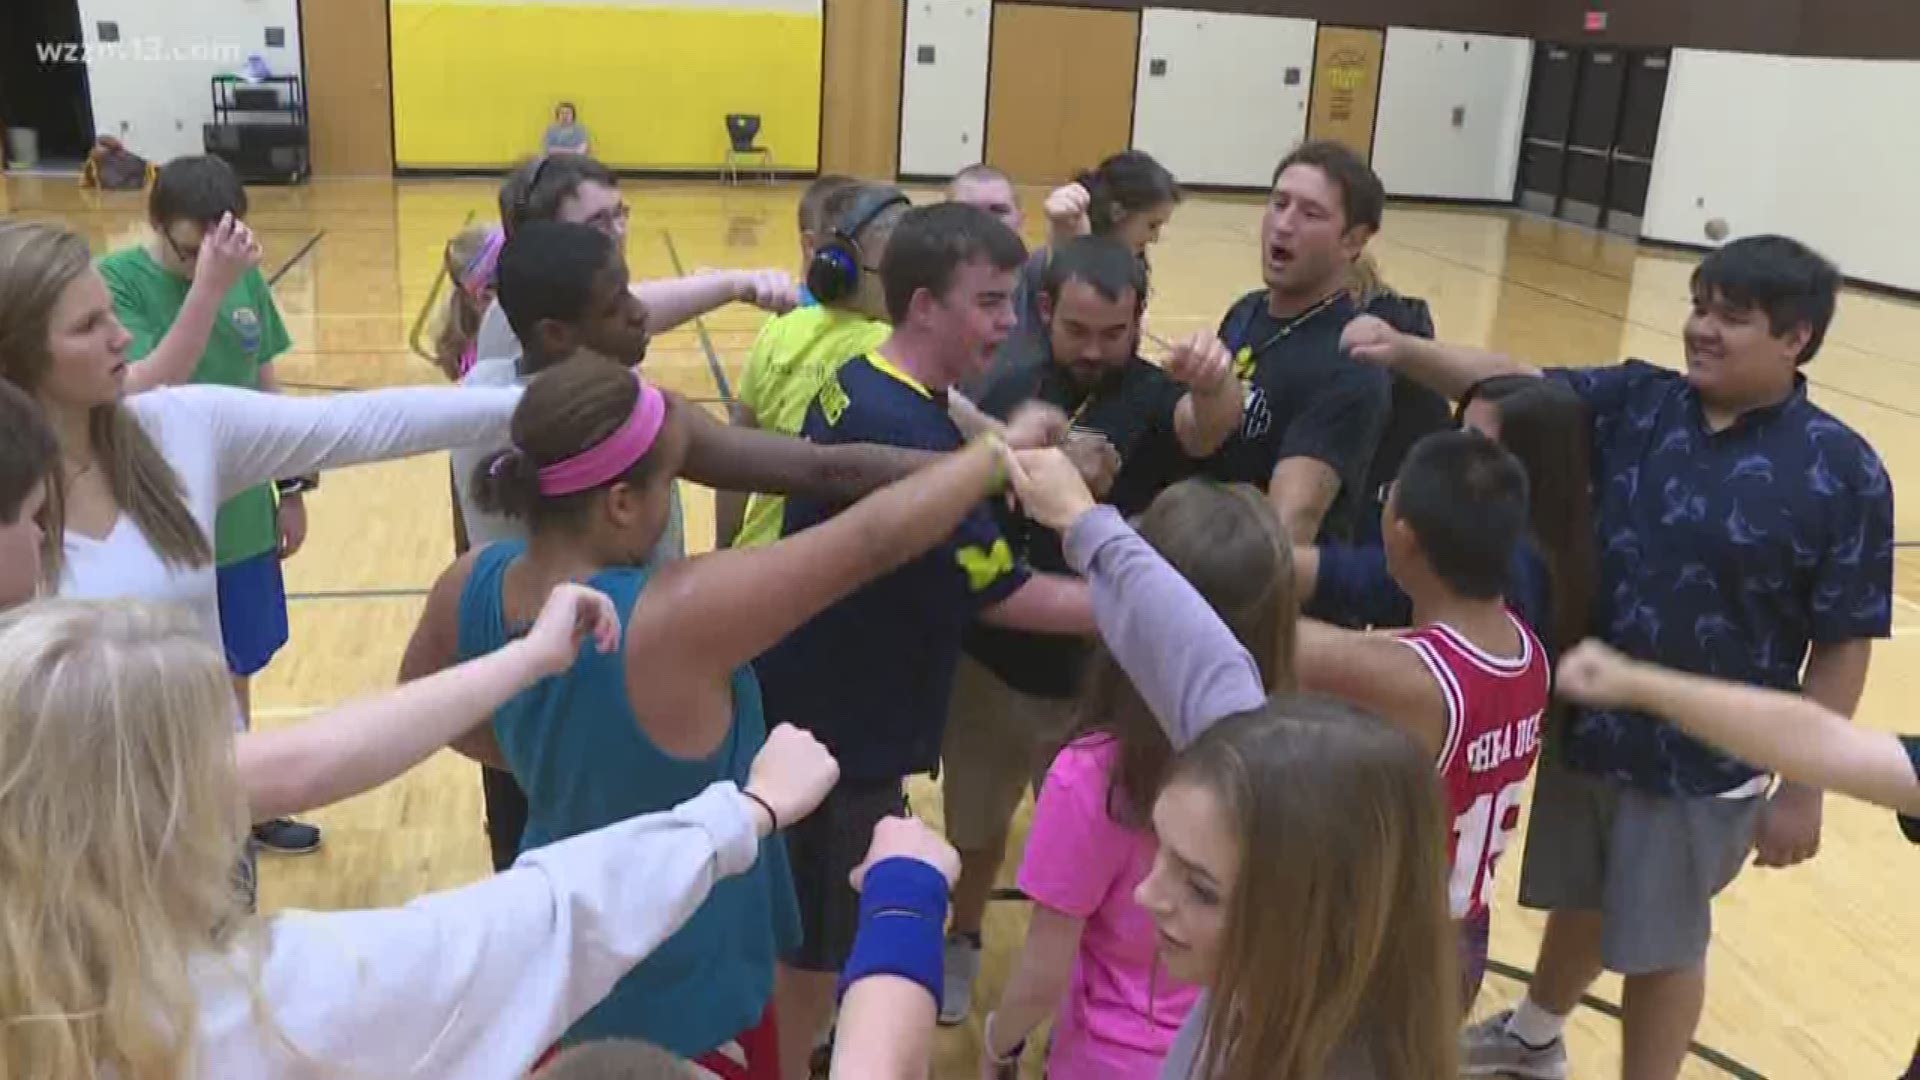 Sunrise Sidelines: Gym class live you've never seen it before